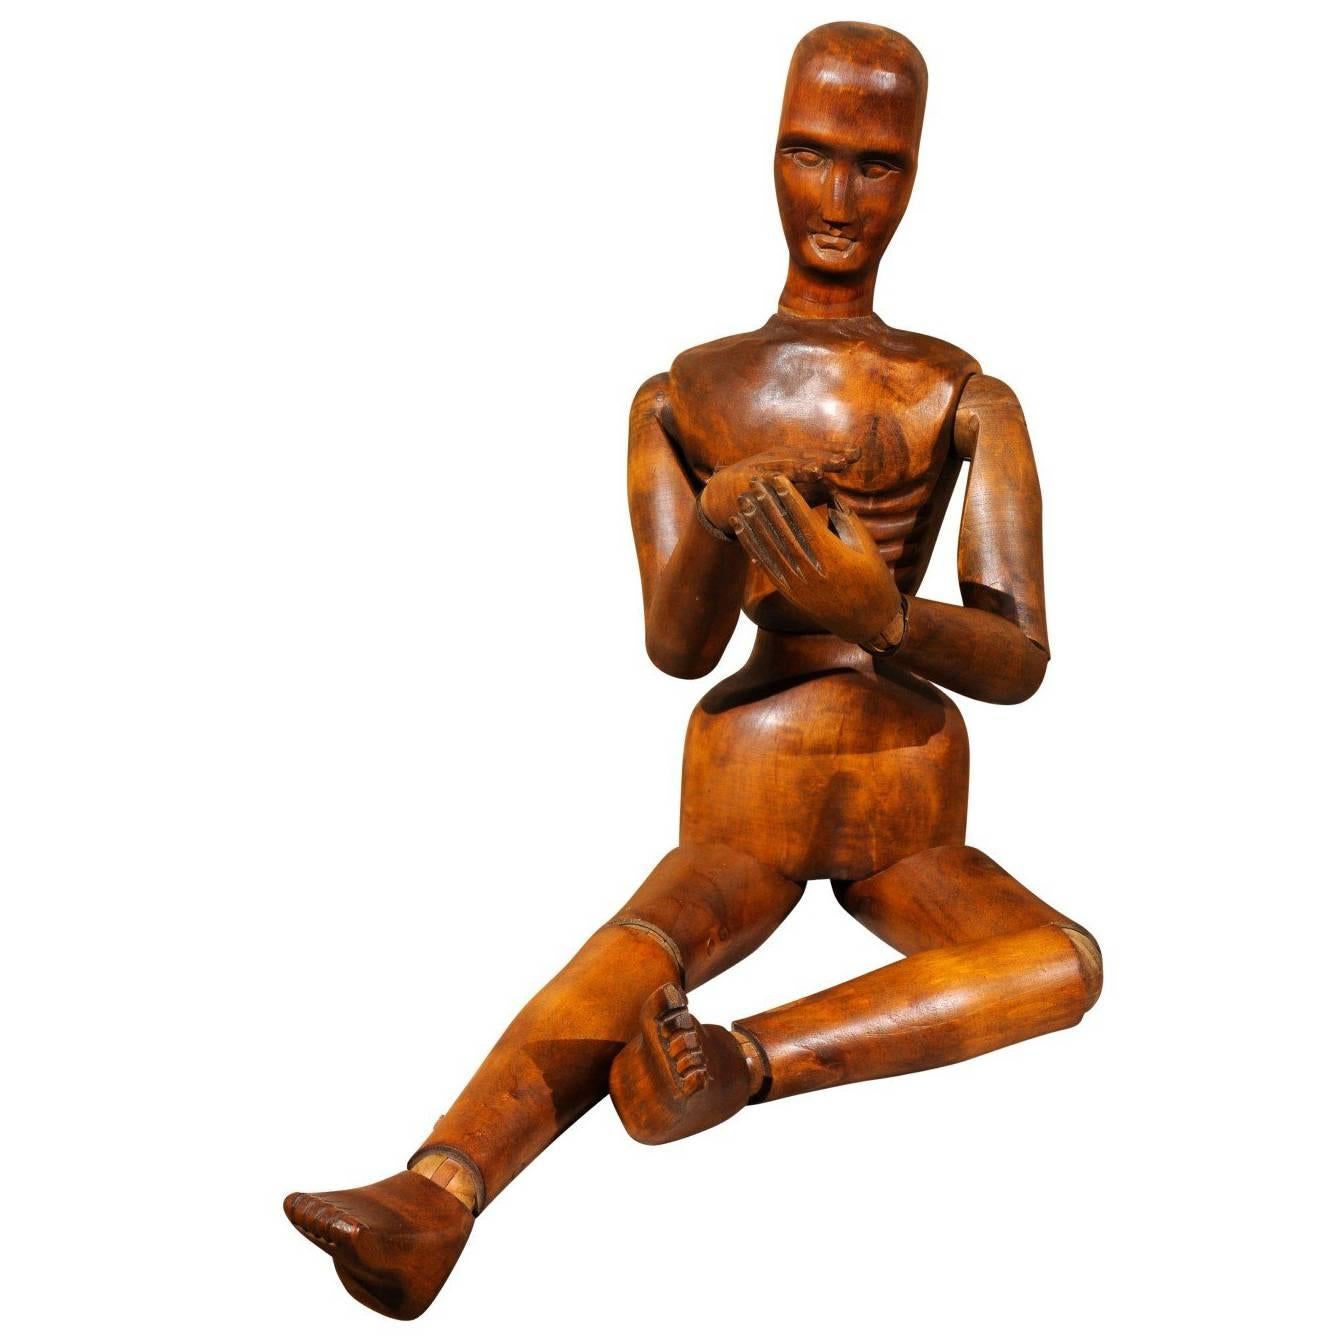 English Articulated Wooden Mannequin from the Early 1900s